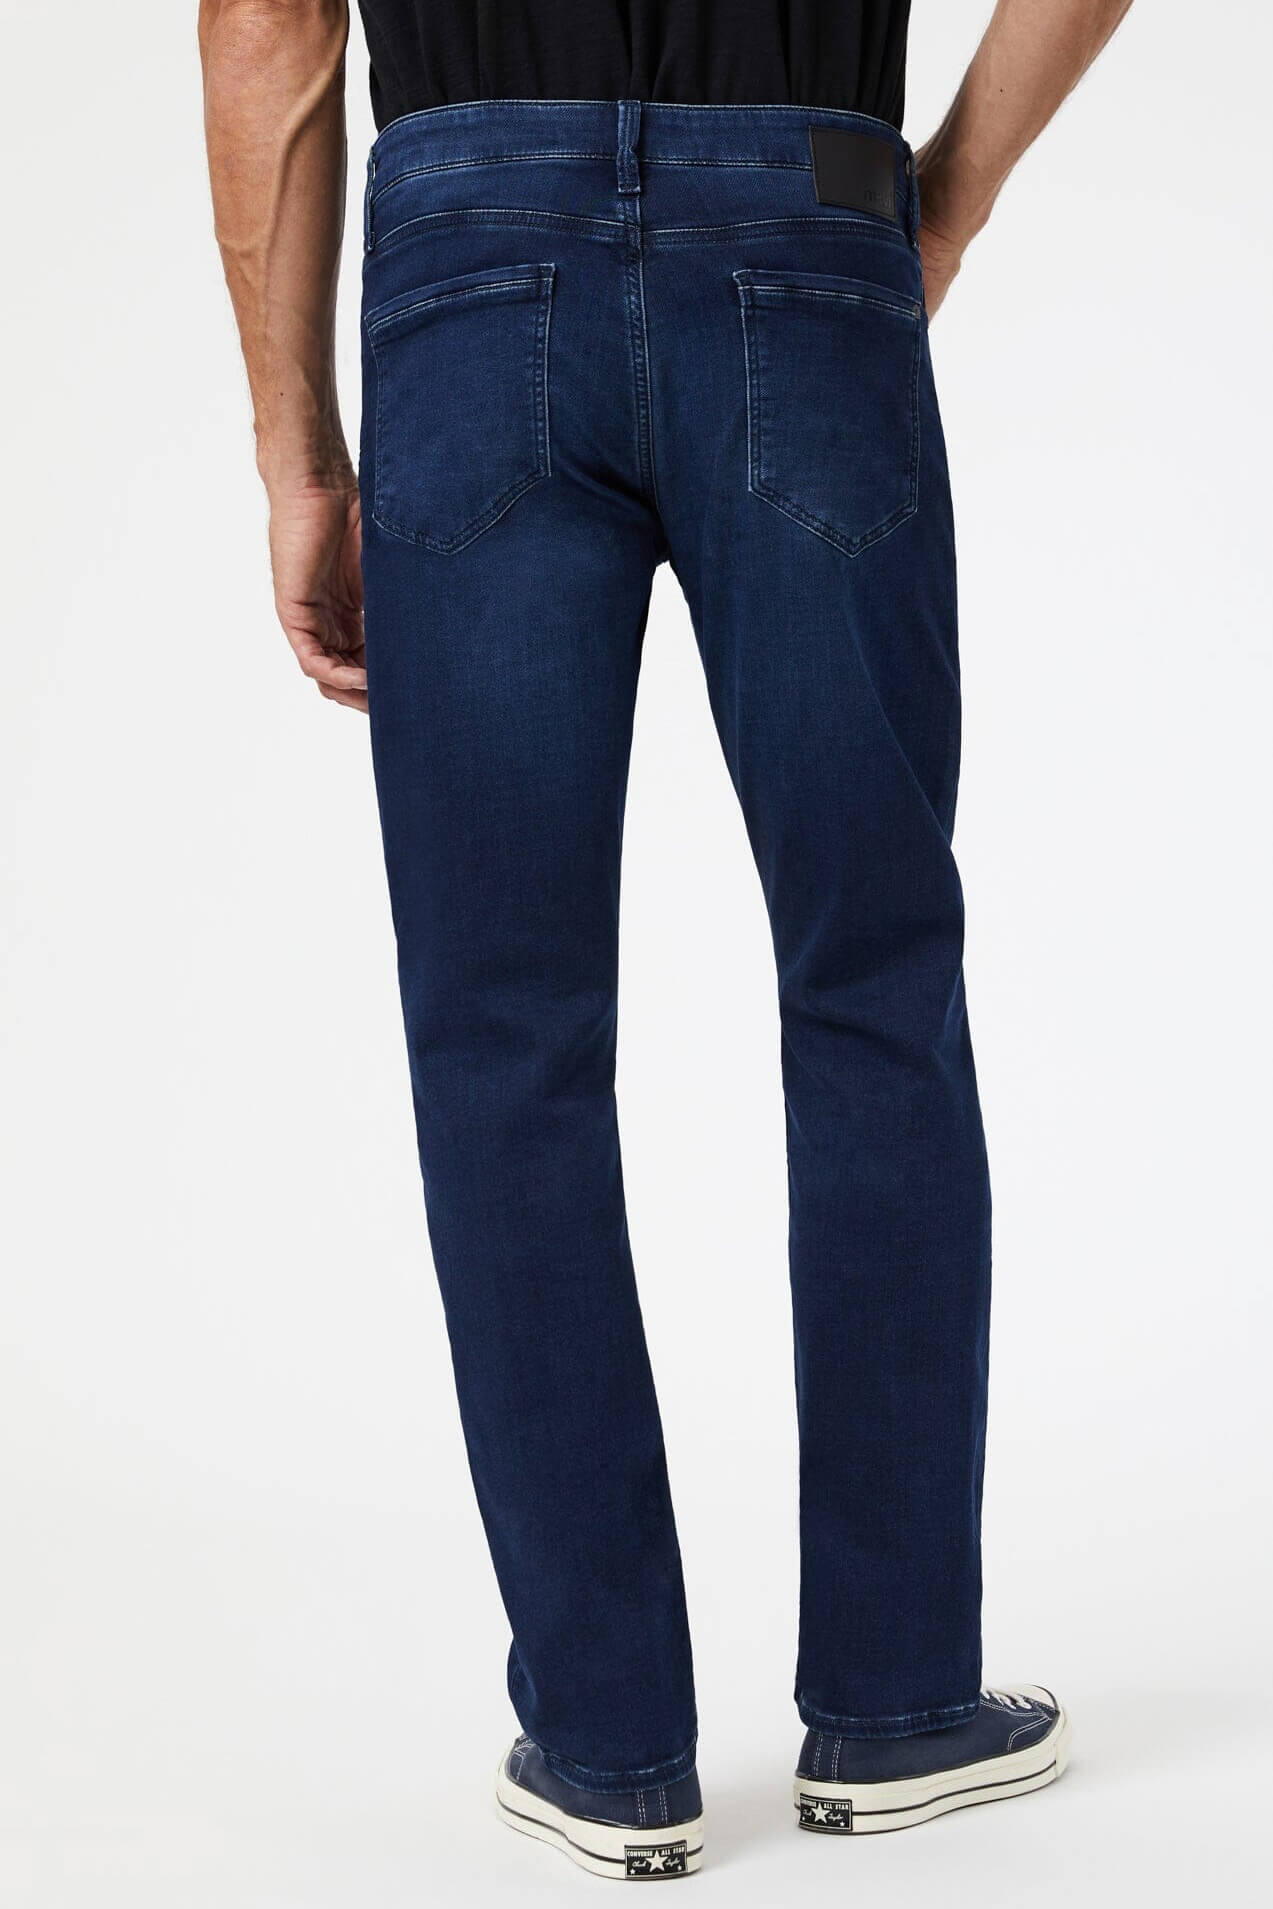 mens relaxed fit denim by Mavi